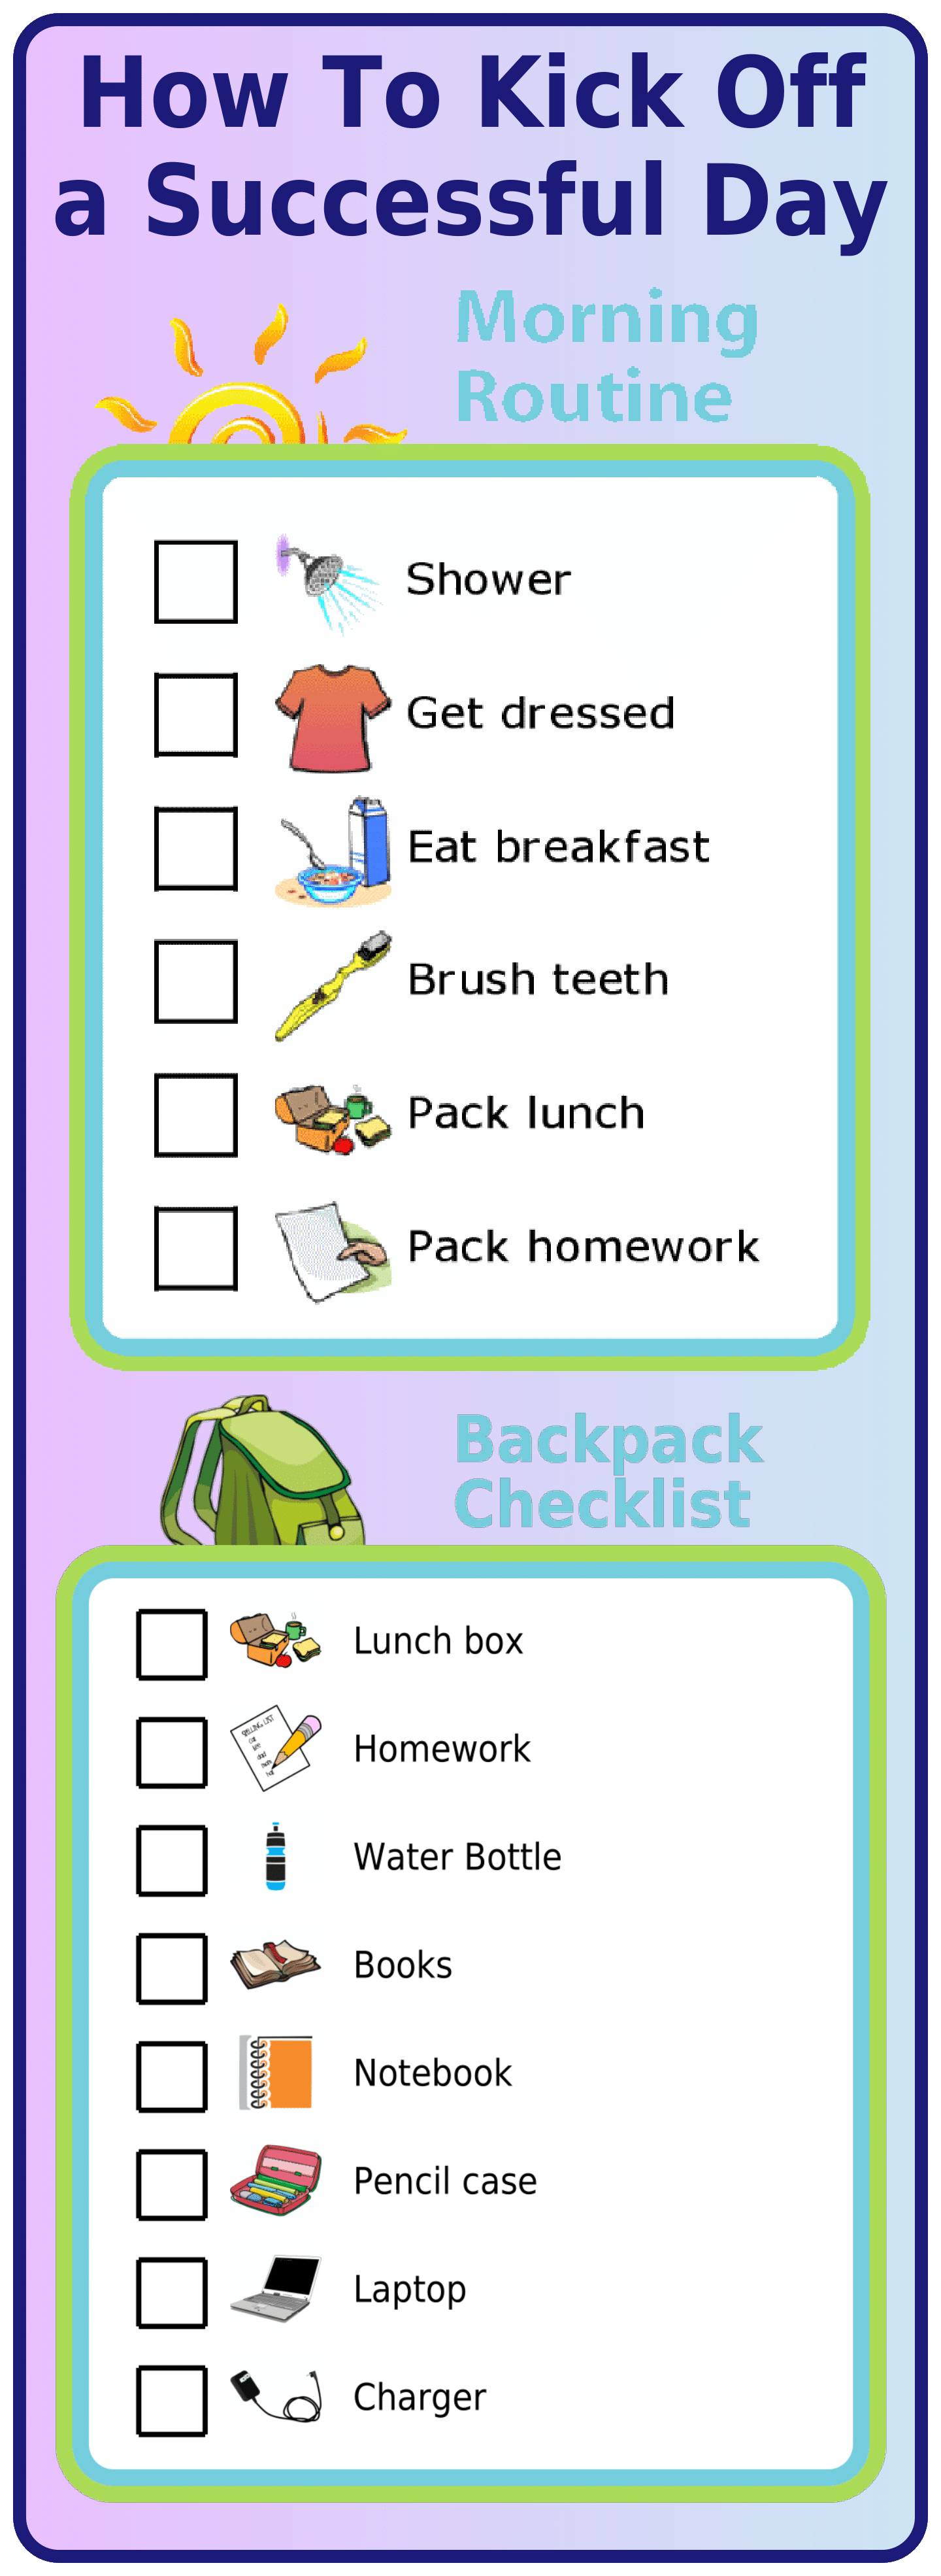 2 picture checklists: morning routine and backpack packing checklist